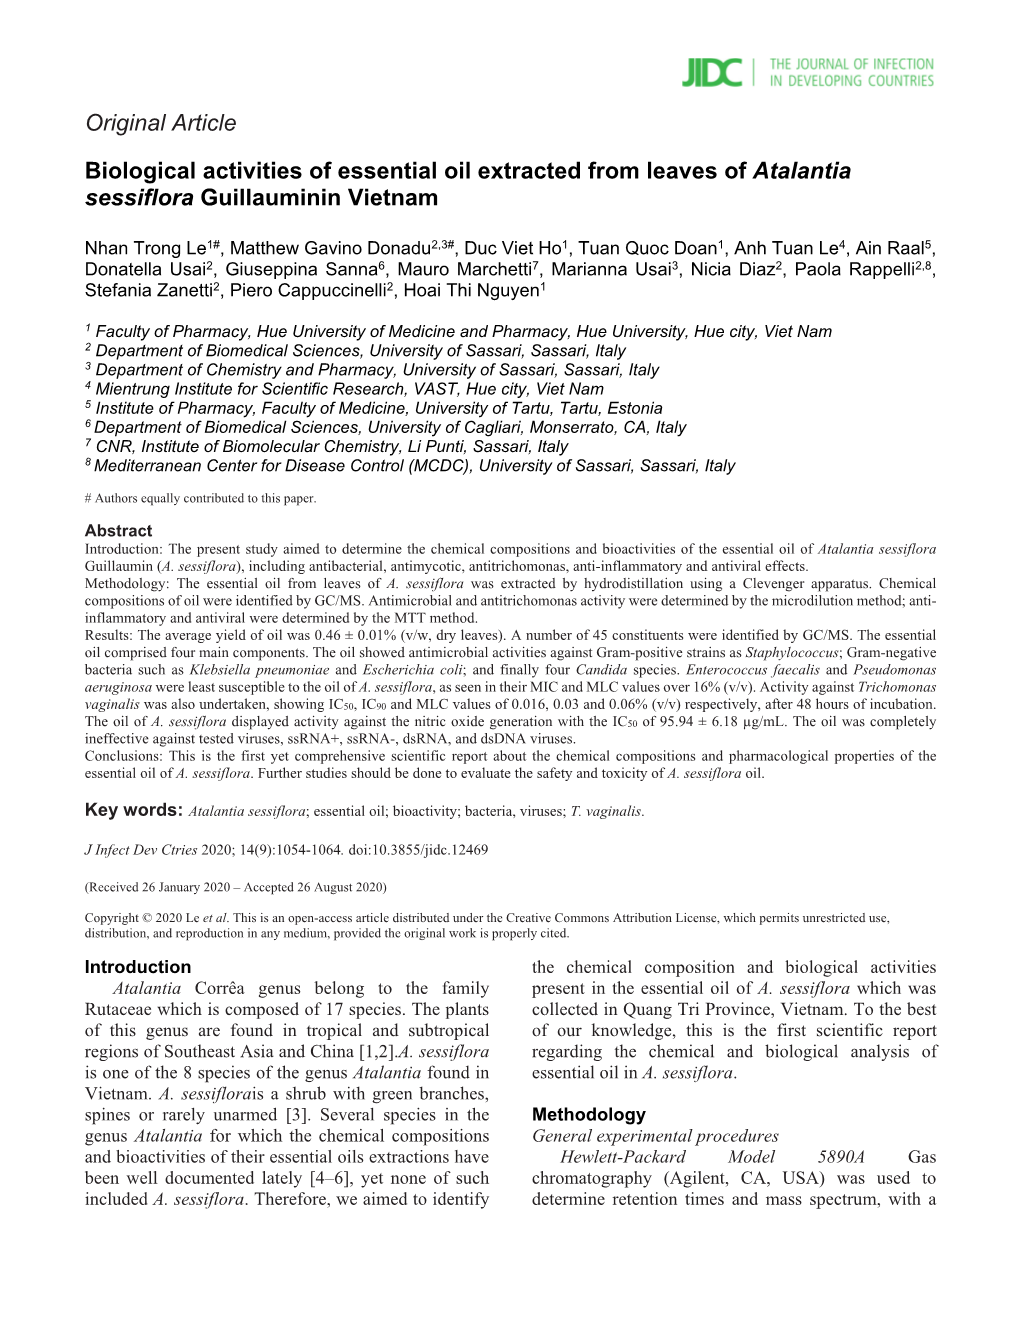 Original Article Biological Activities of Essential Oil Extracted from Leaves